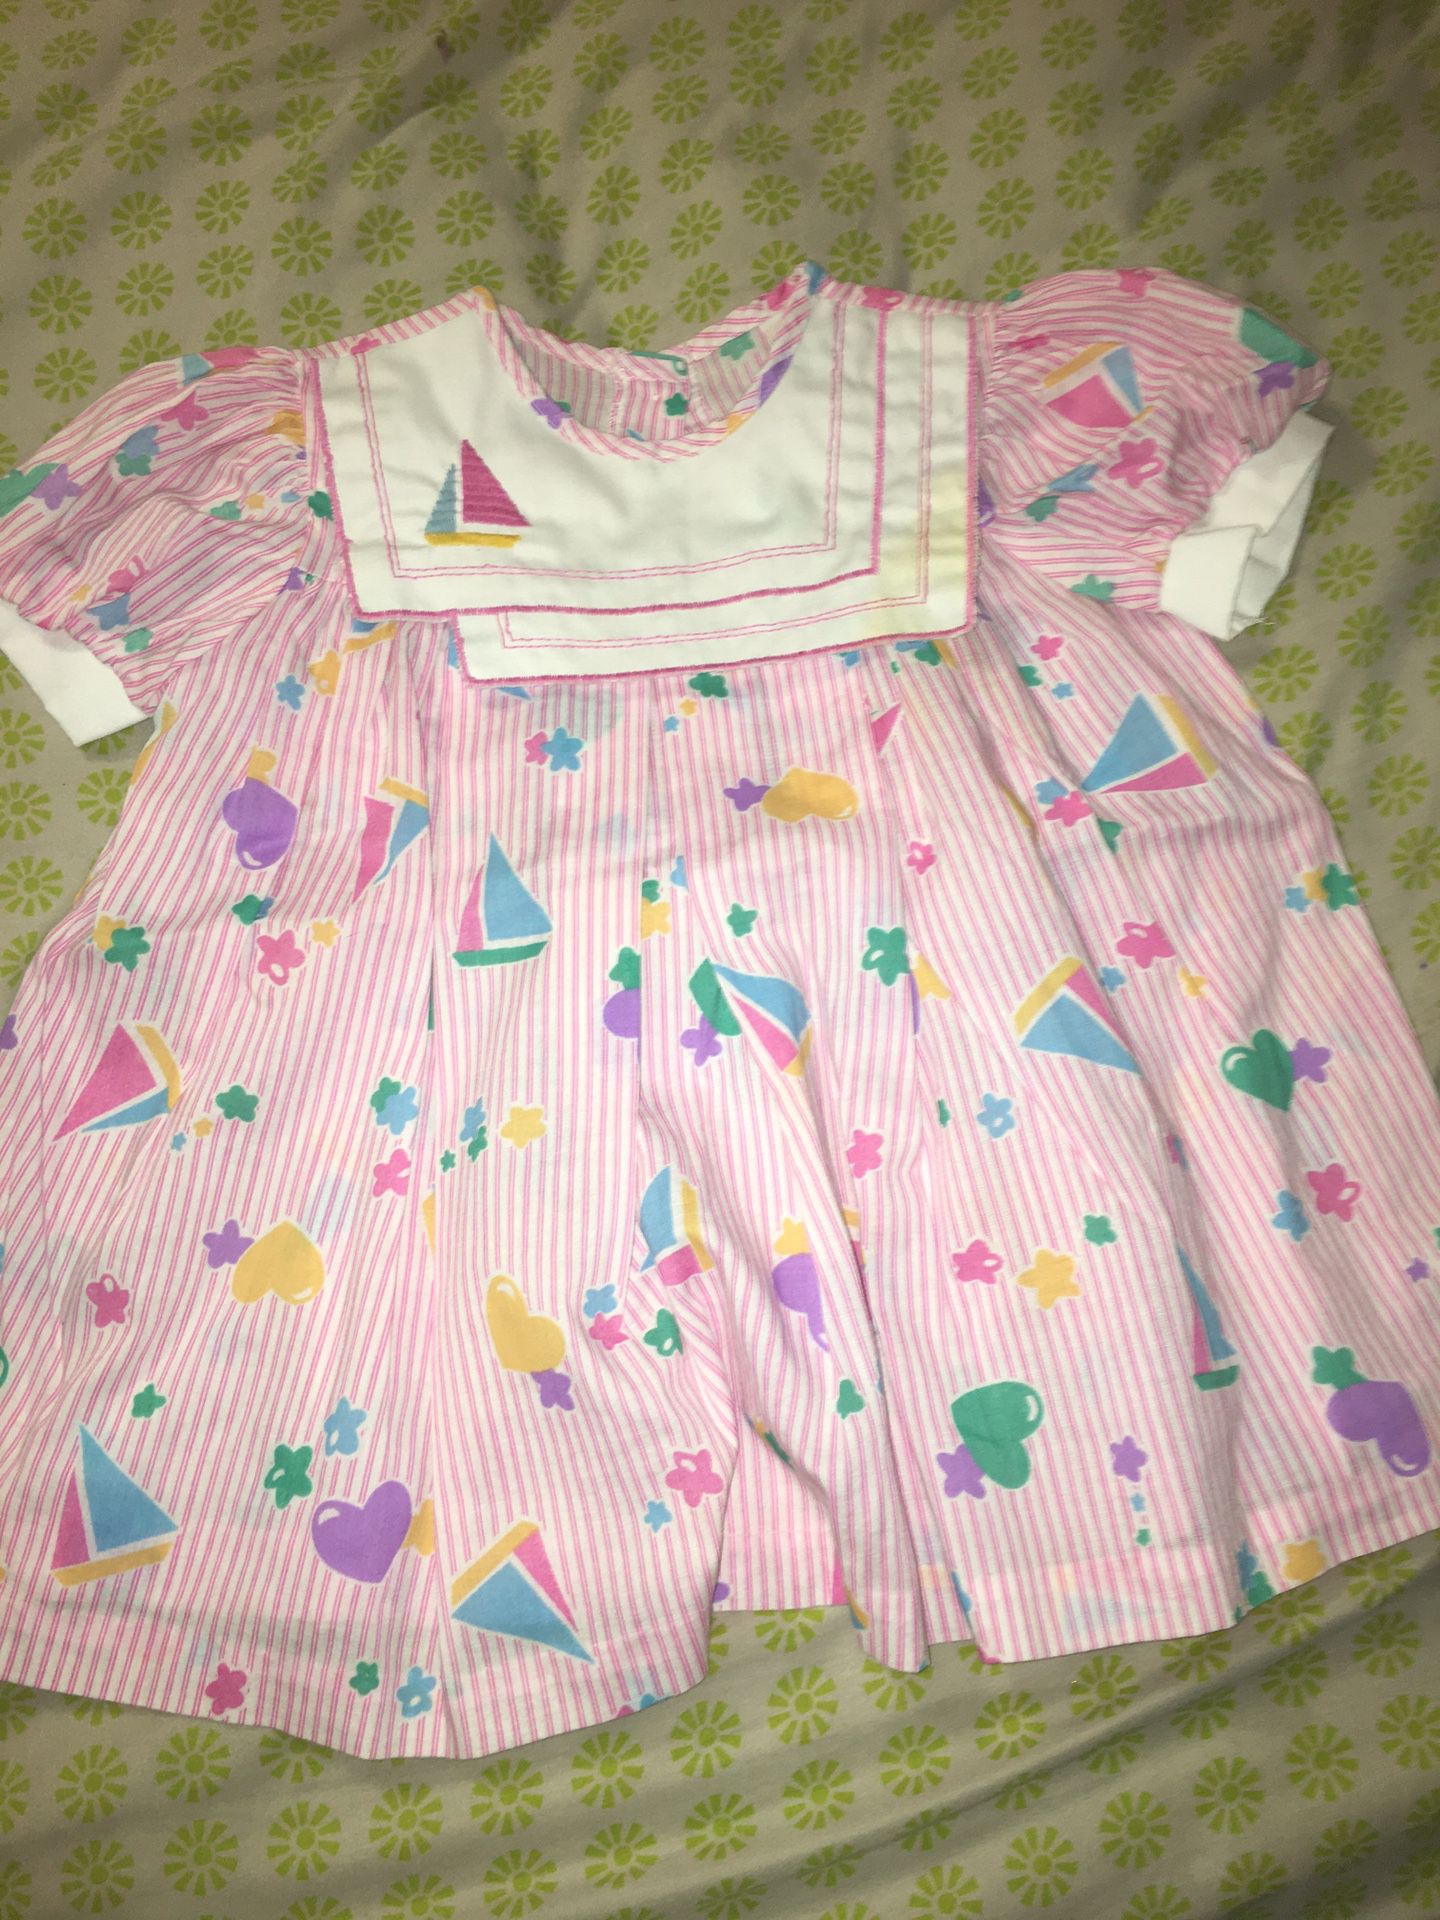 Vintage you are in Wonderland Girls Dress Pink with Shapes 3T